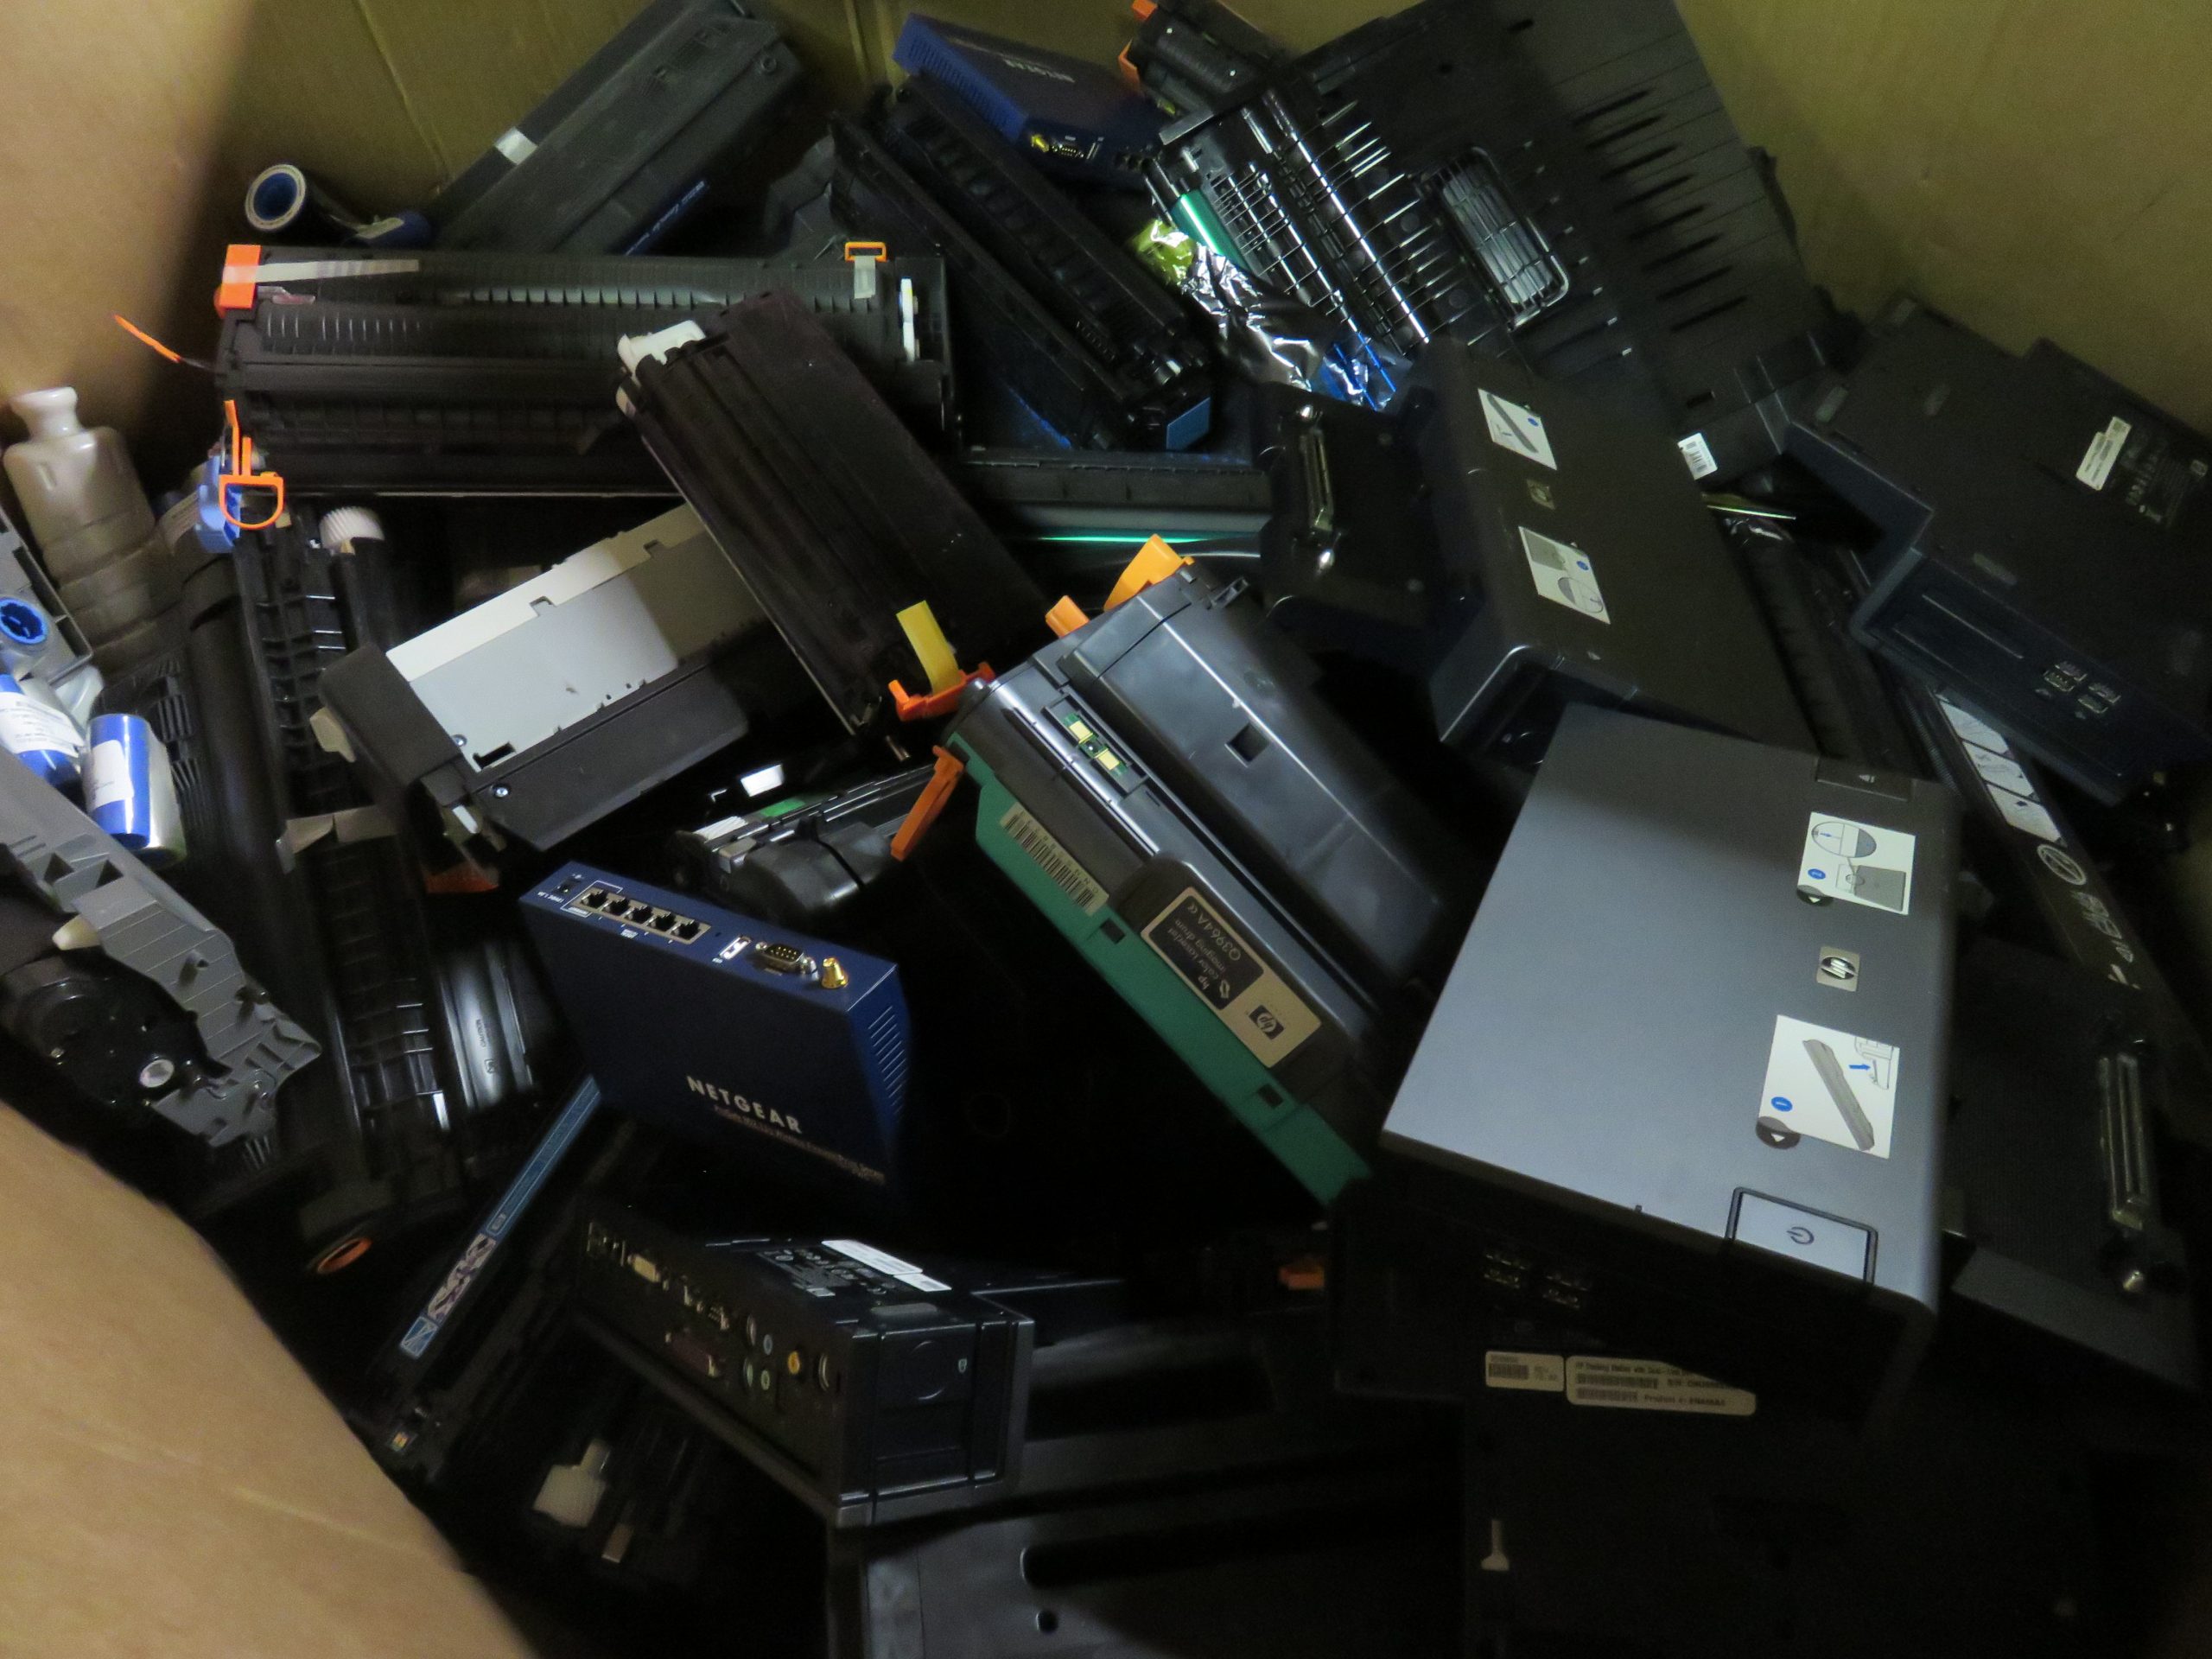 Pile of electronic components.